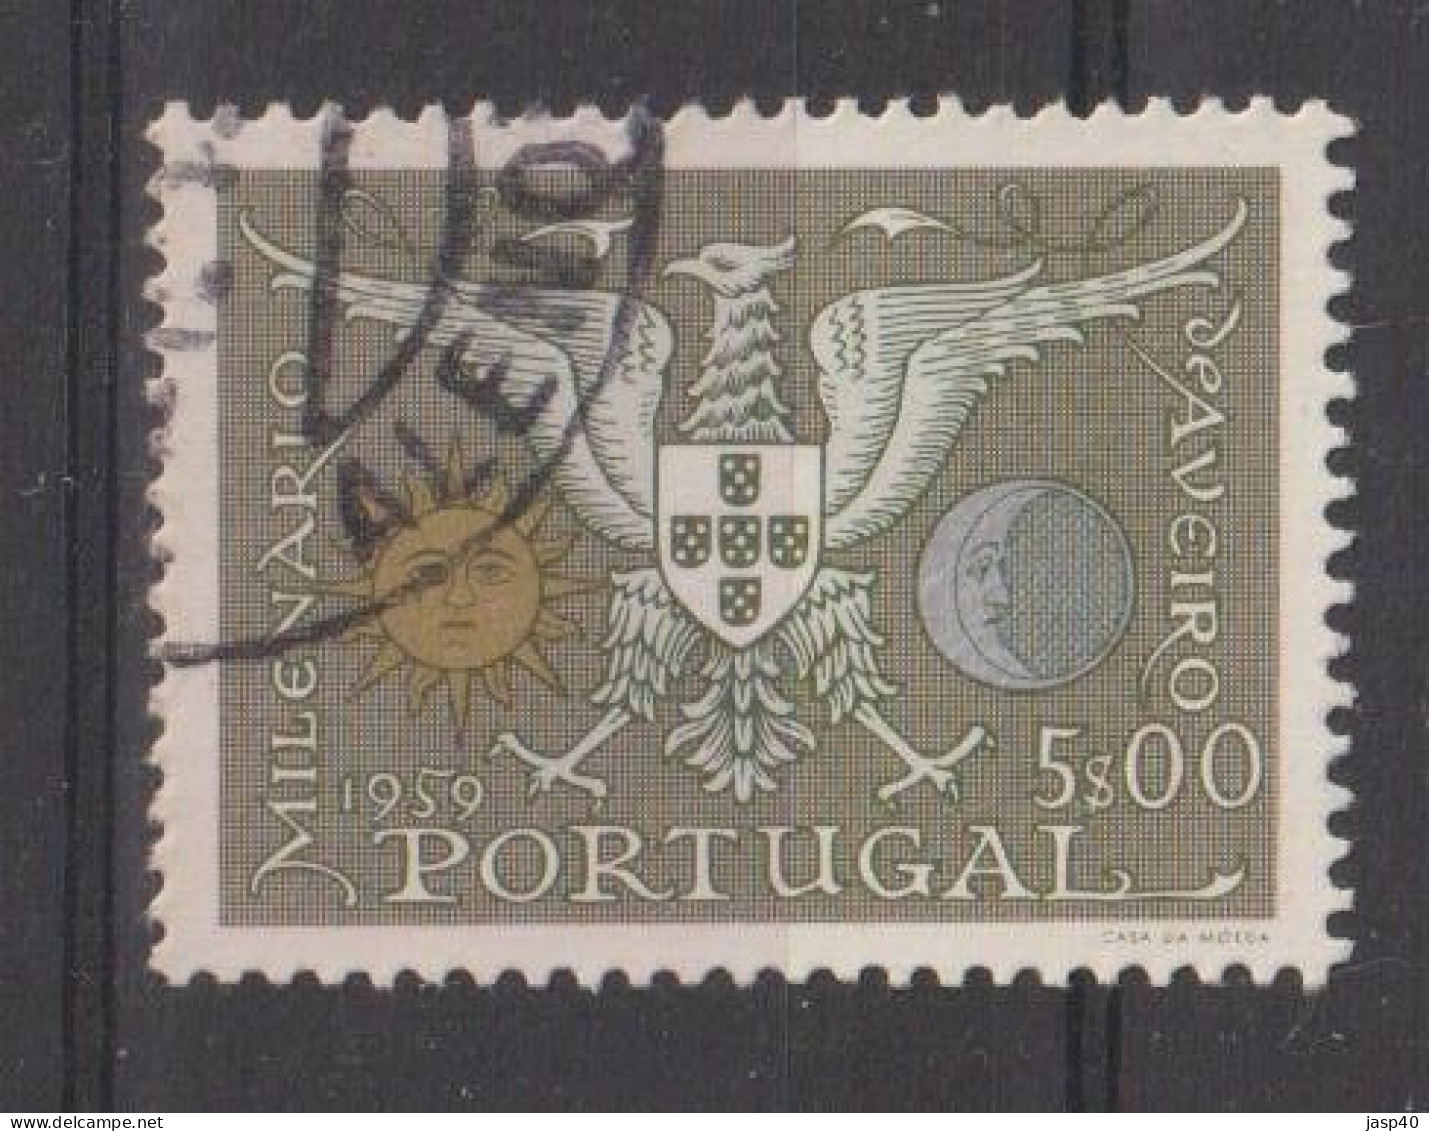 PORTUGAL 848 - POSTMARKS OF PORTUGAL - ALENQUER - Gebraucht